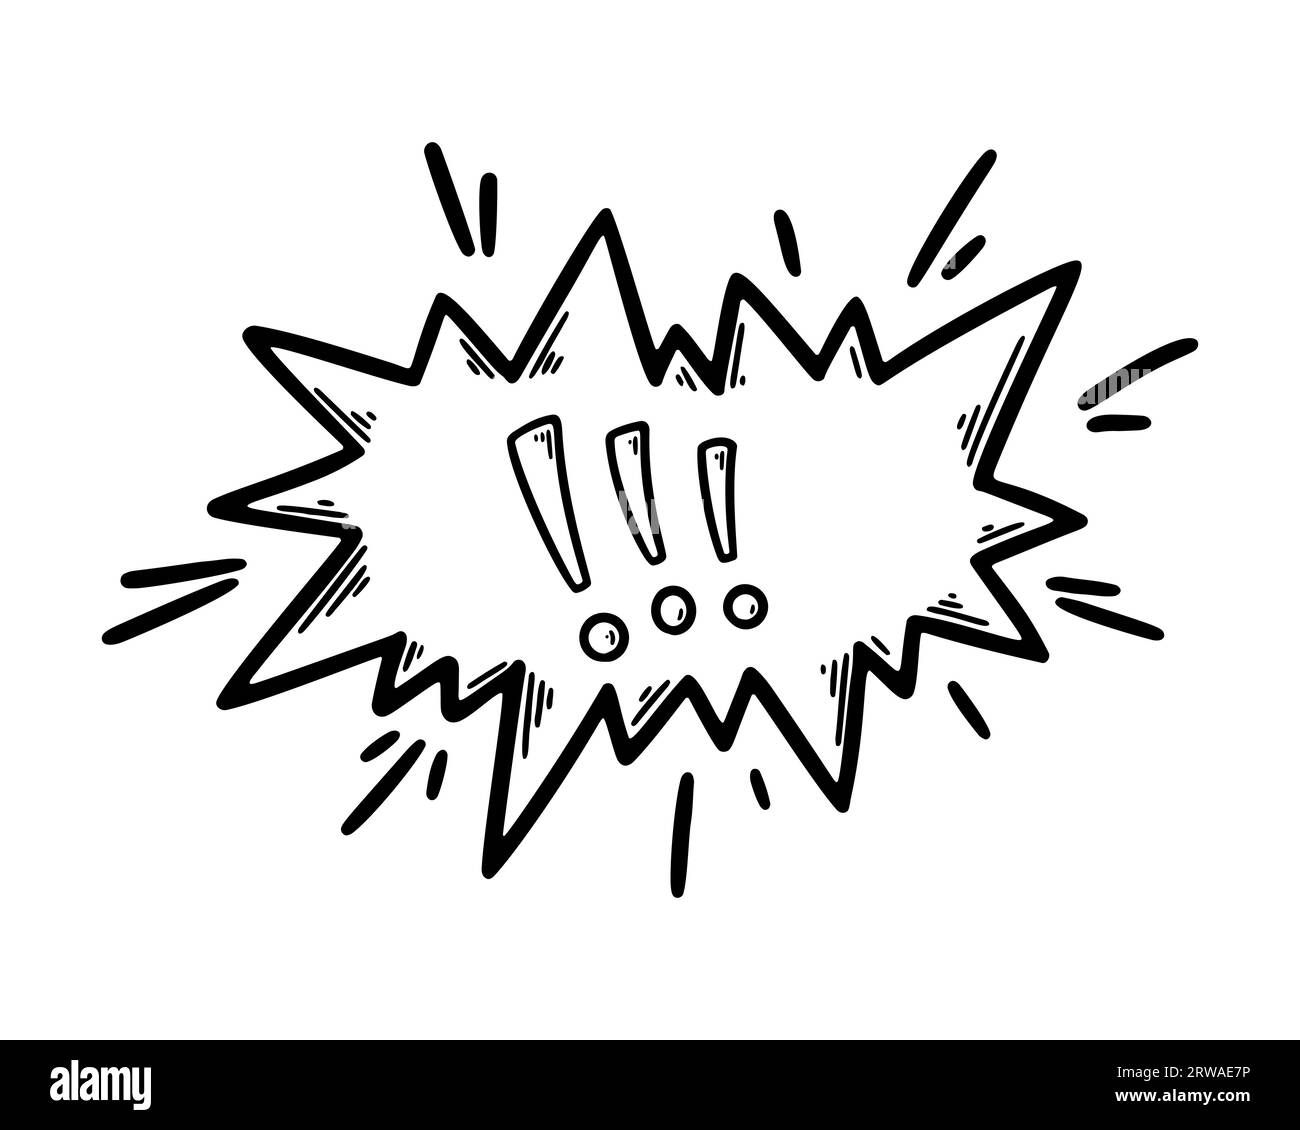 Angry Human Figure Speech Bubble Trash Talking Drawing Stock Illustration -  Download Image Now - iStock